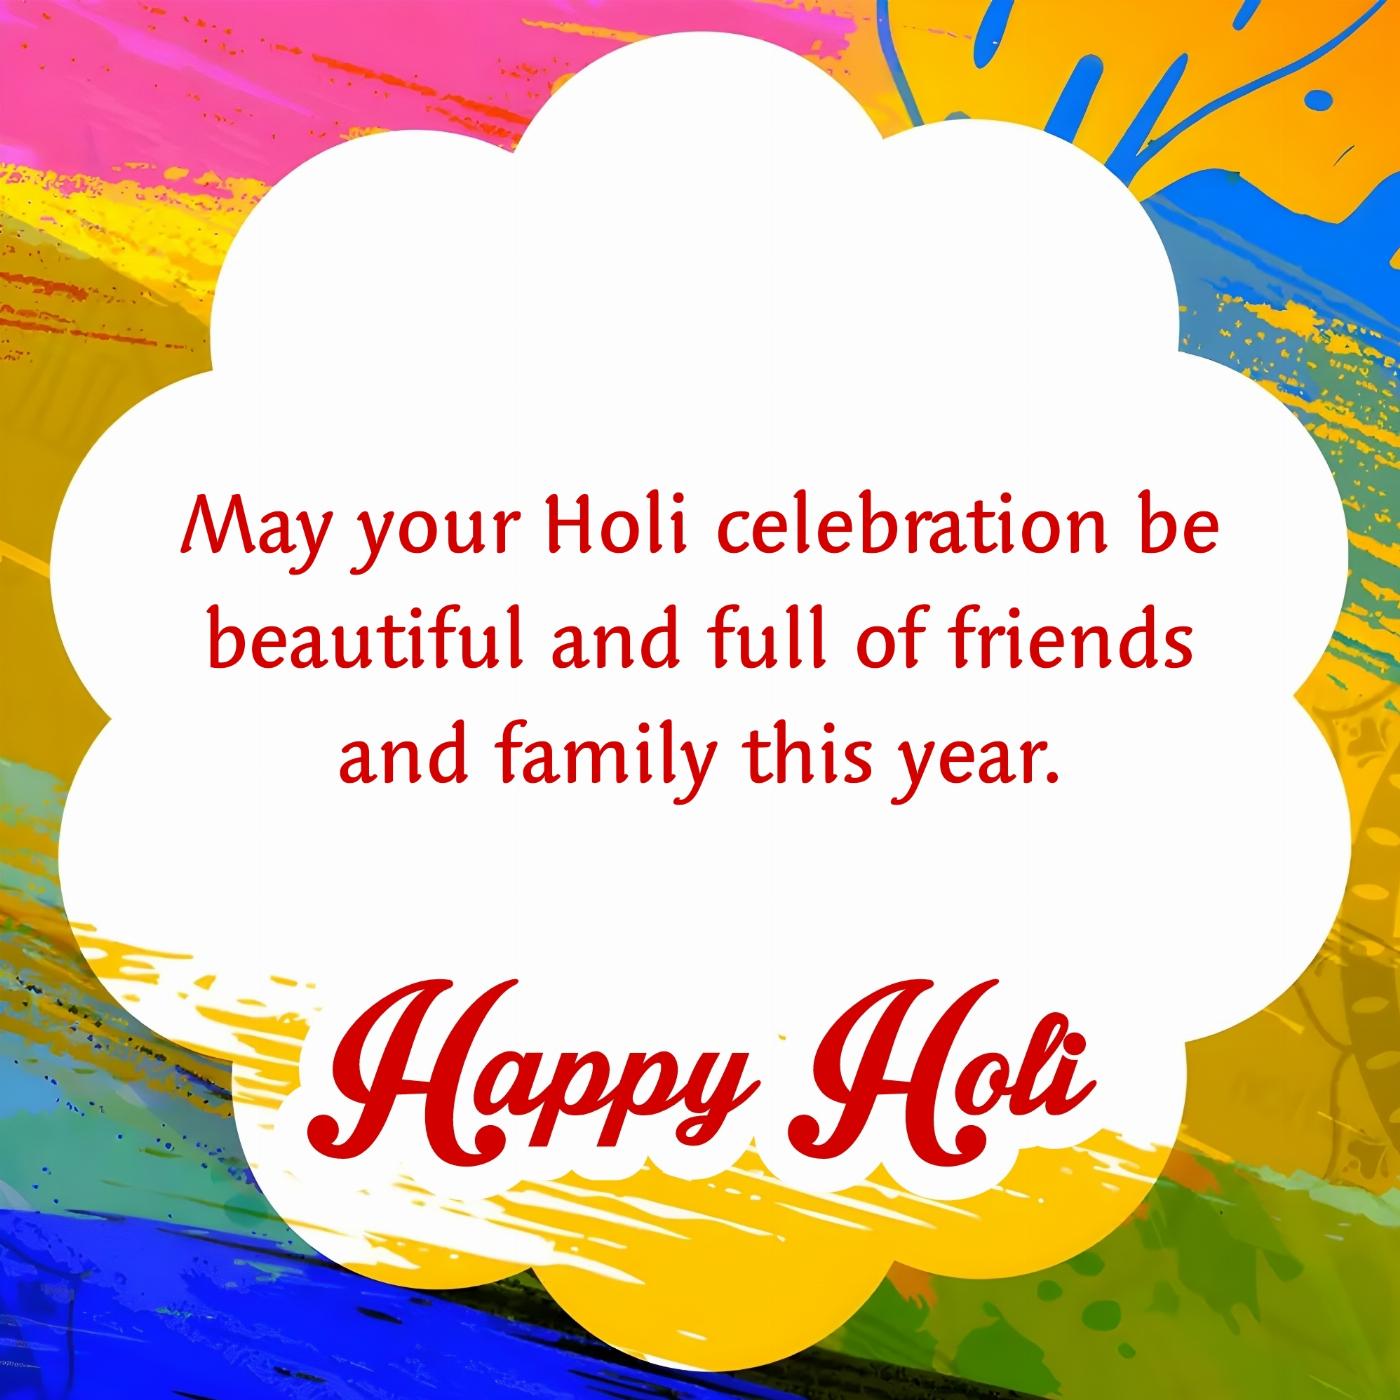 May your Holi celebration be beautiful and full of friends and family this year